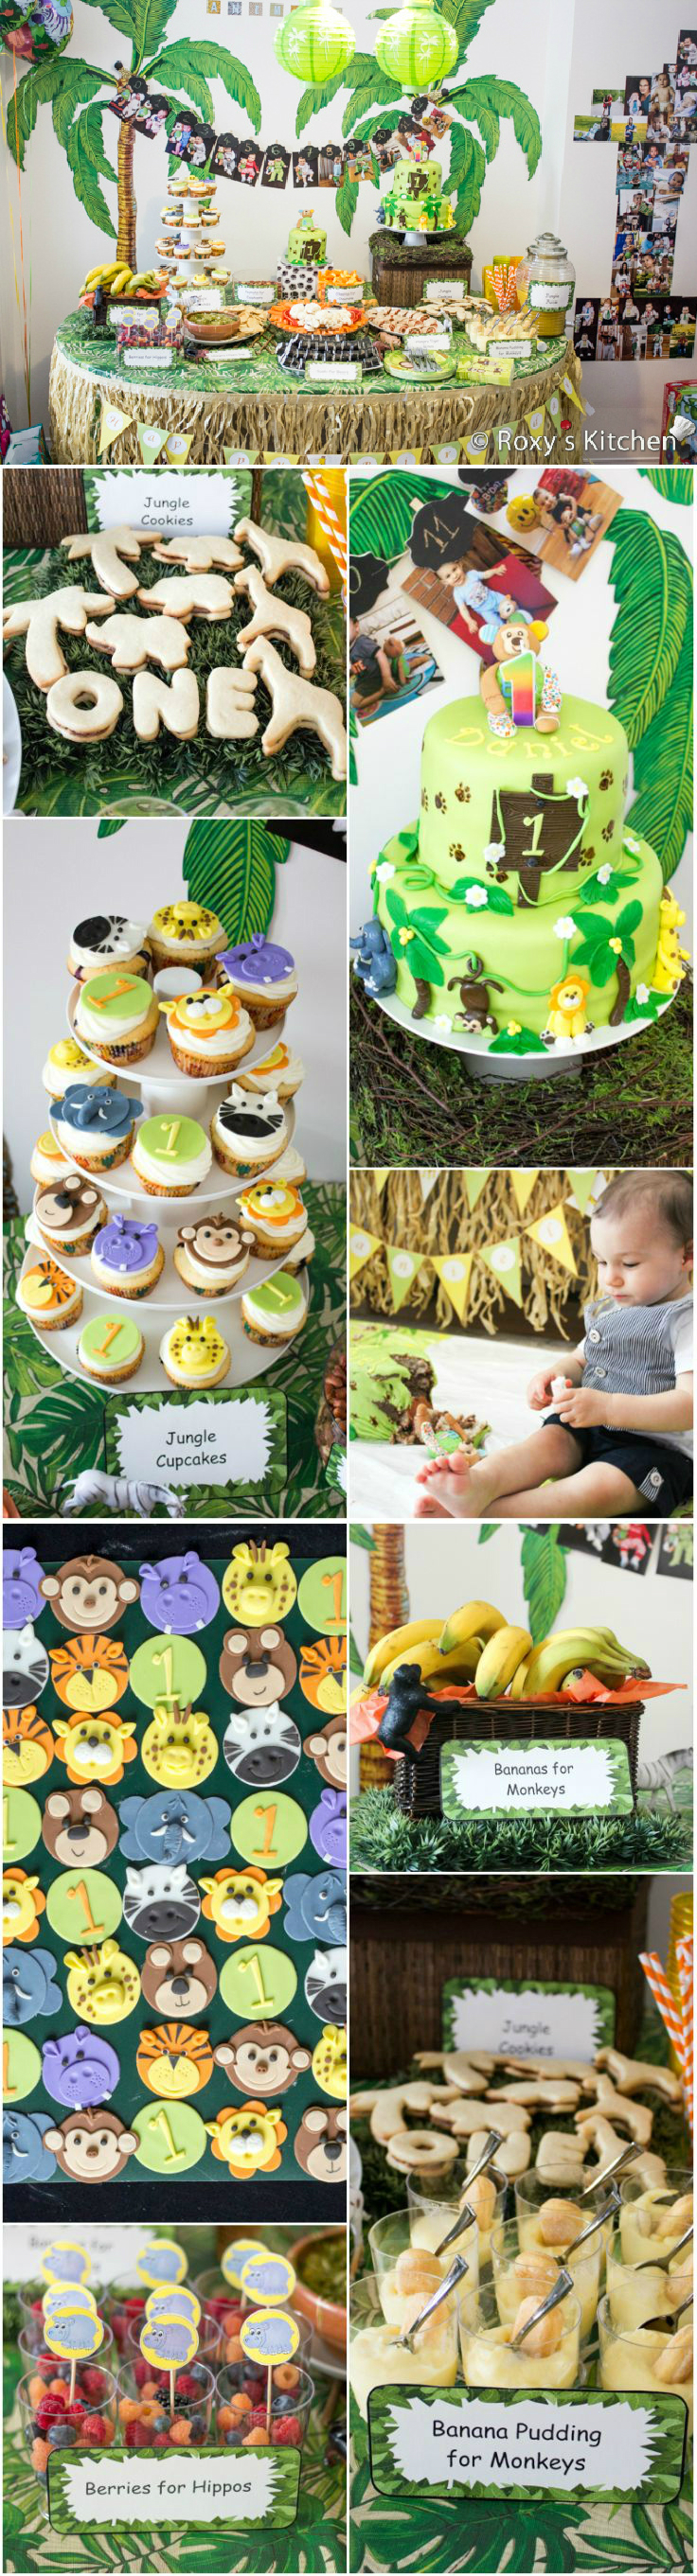 Safari / Jungle Themed First Birthday Party - Dessert Ideas. Great for a Baby Shower Too! Jungle Cake, Smash Cake, Jungle Animal Cupcakes & Toppers, Palm Tree / Elephant / Giraffe Cookies, Banana Pudding, Berries, Bananas